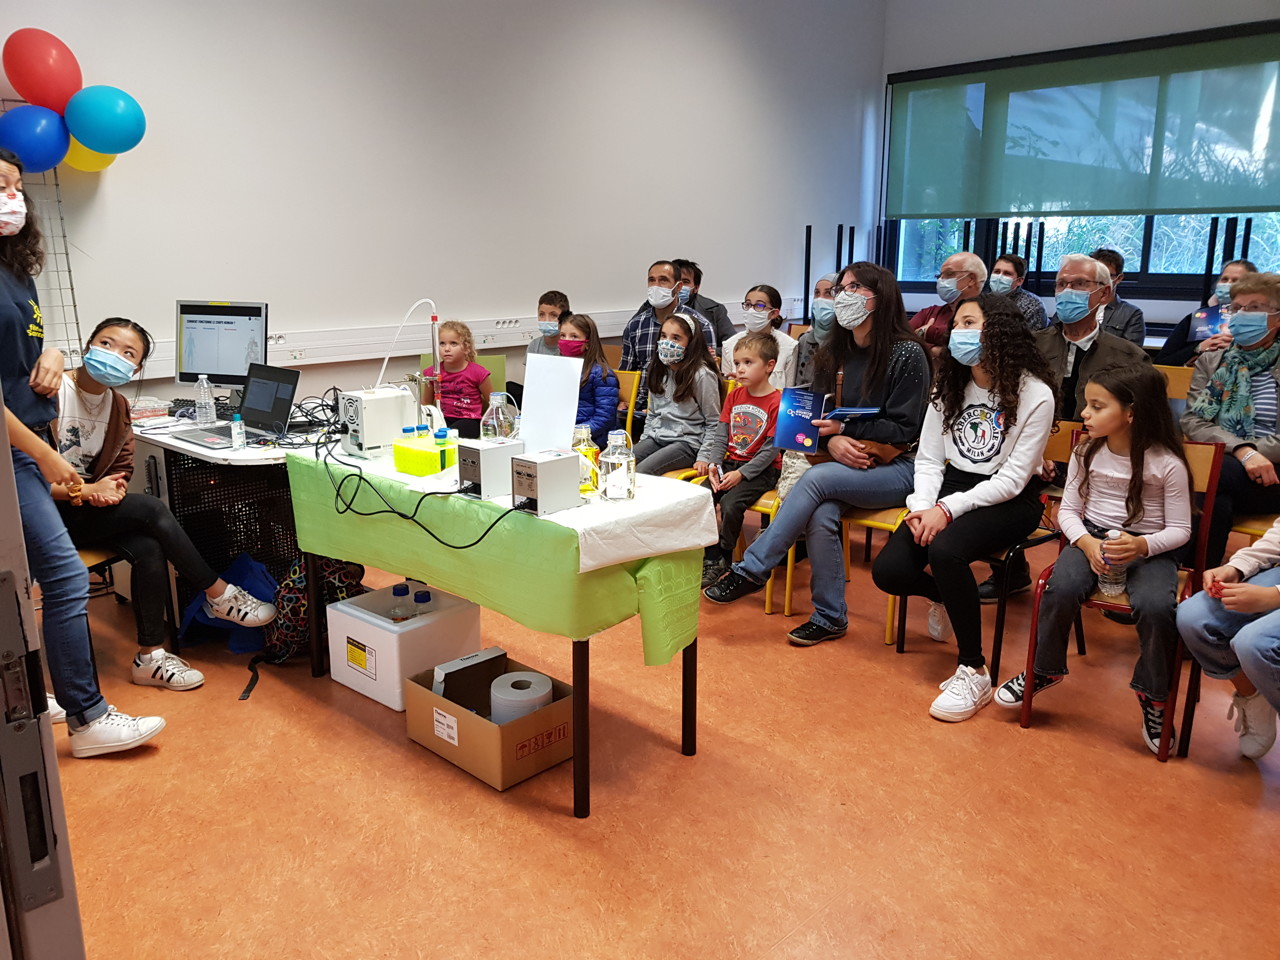 Weekend of October 9 and 10: The Science Festival is celebrated all over Oise

